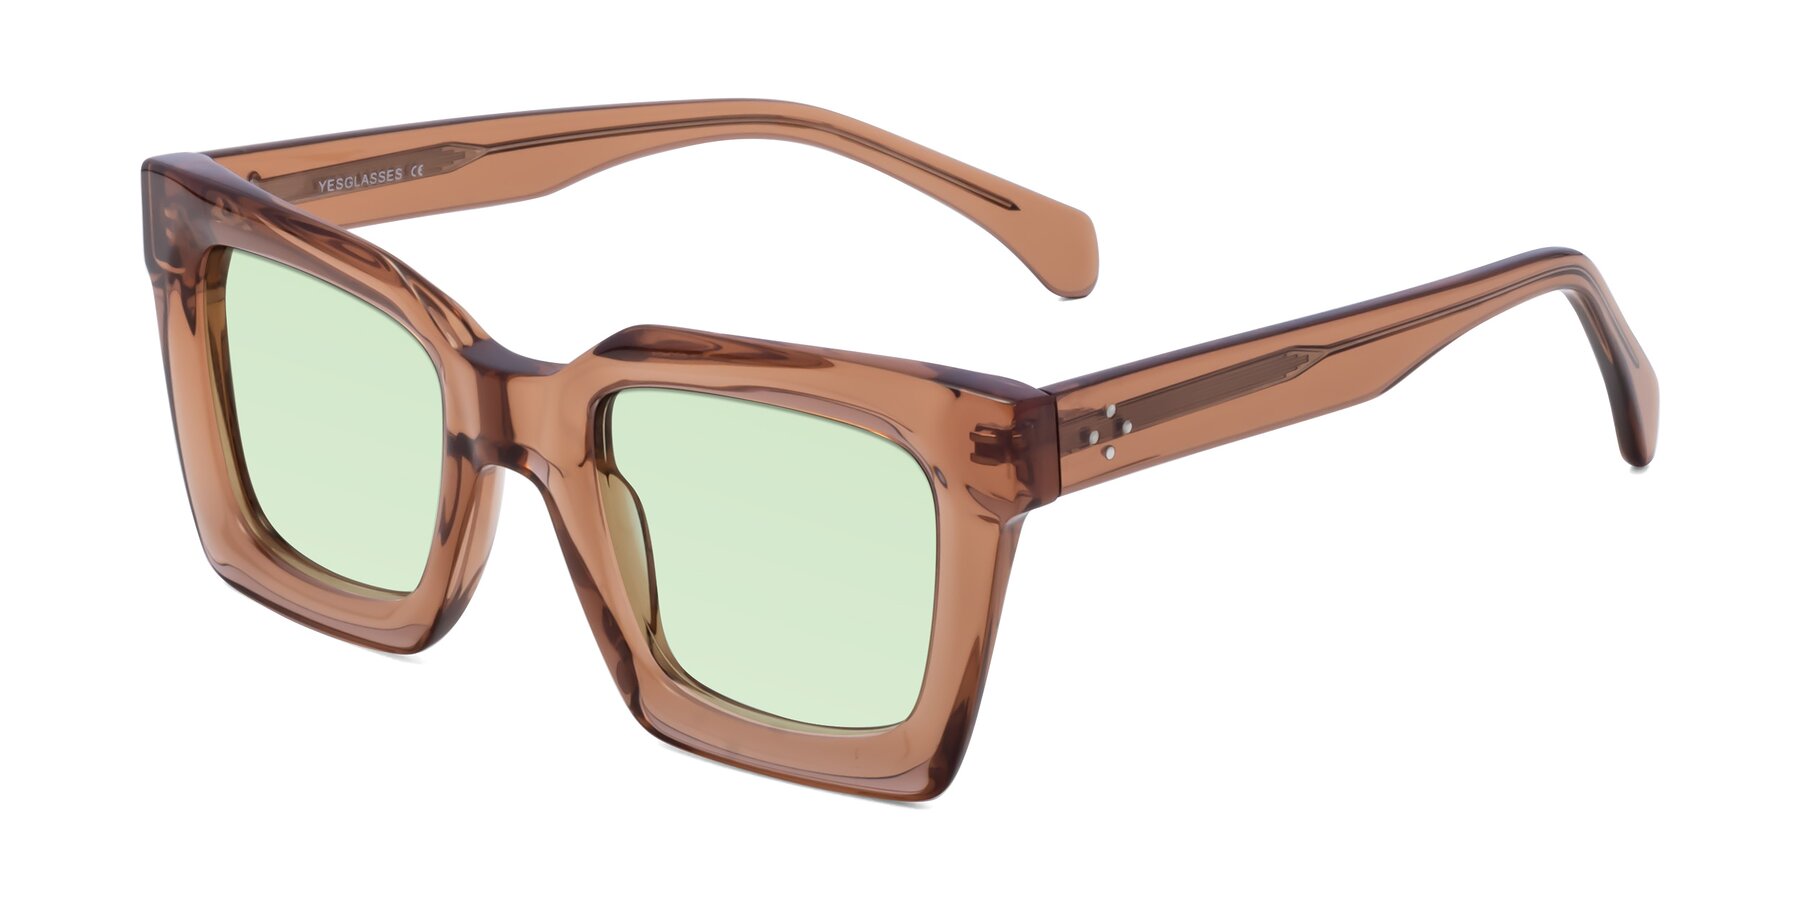 Angle of Piper in Caramel with Light Green Tinted Lenses